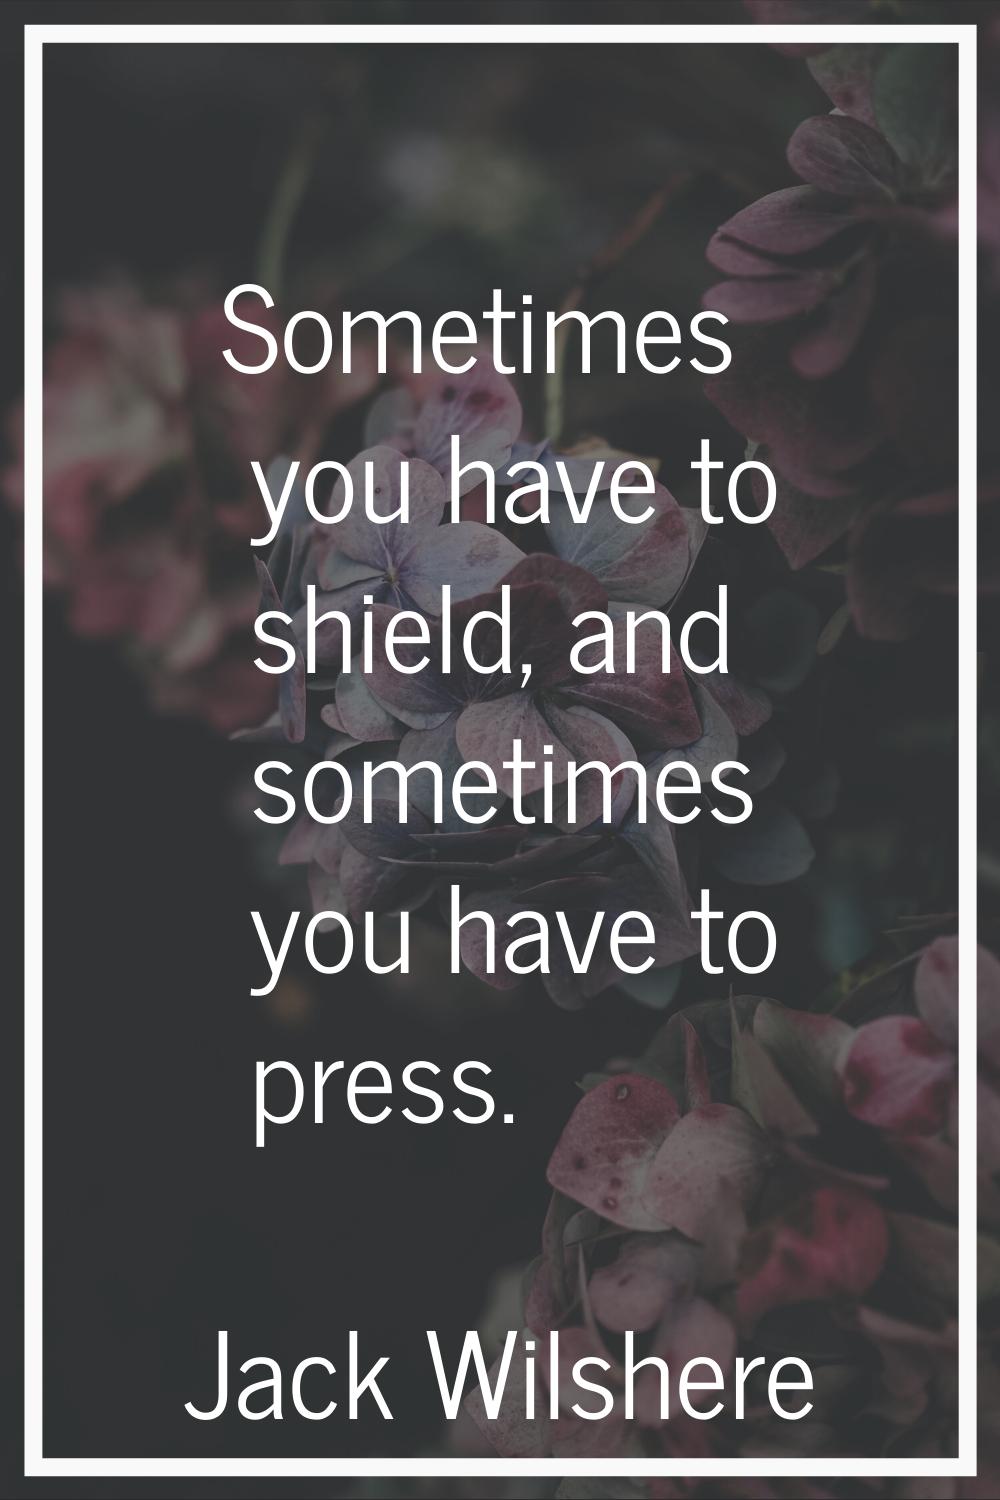 Sometimes you have to shield, and sometimes you have to press.